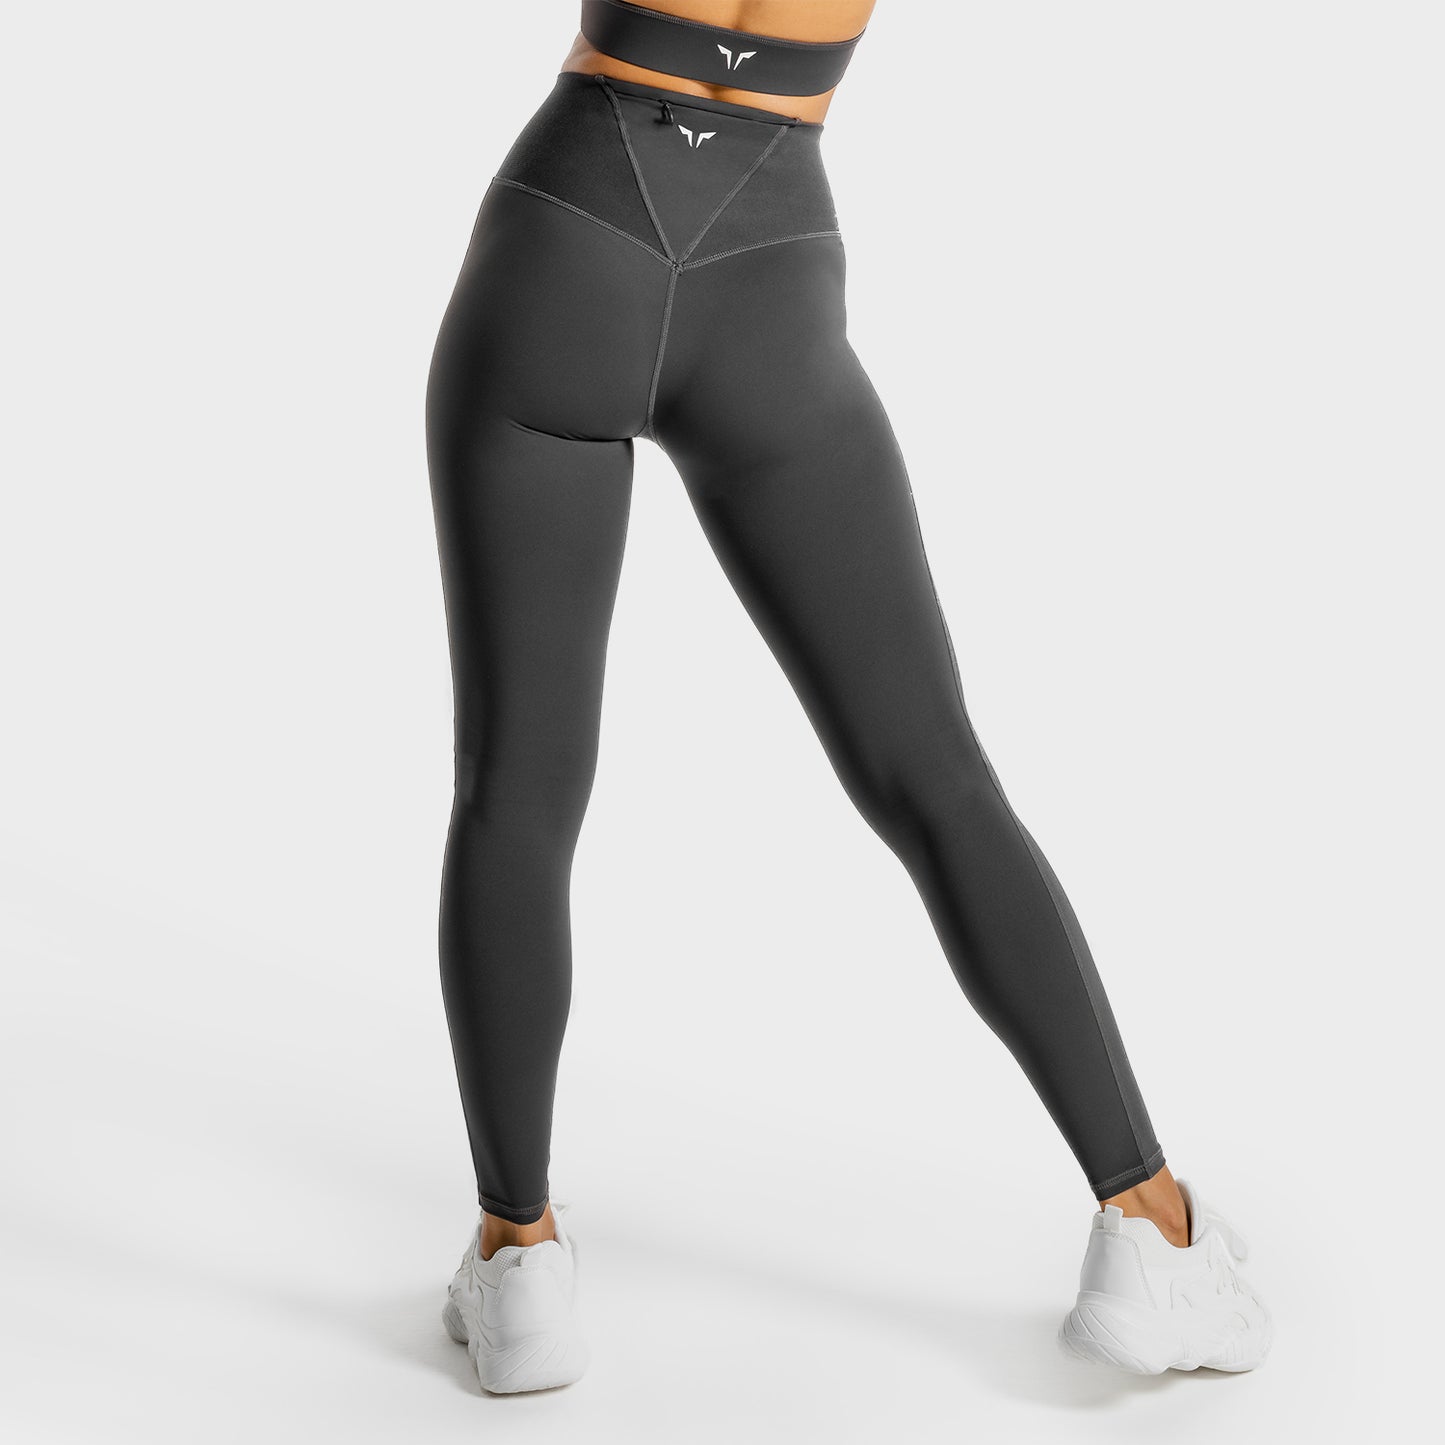 squatwolf-gym-leggings-for-women-core-leggings-charcoal-workout-clothes